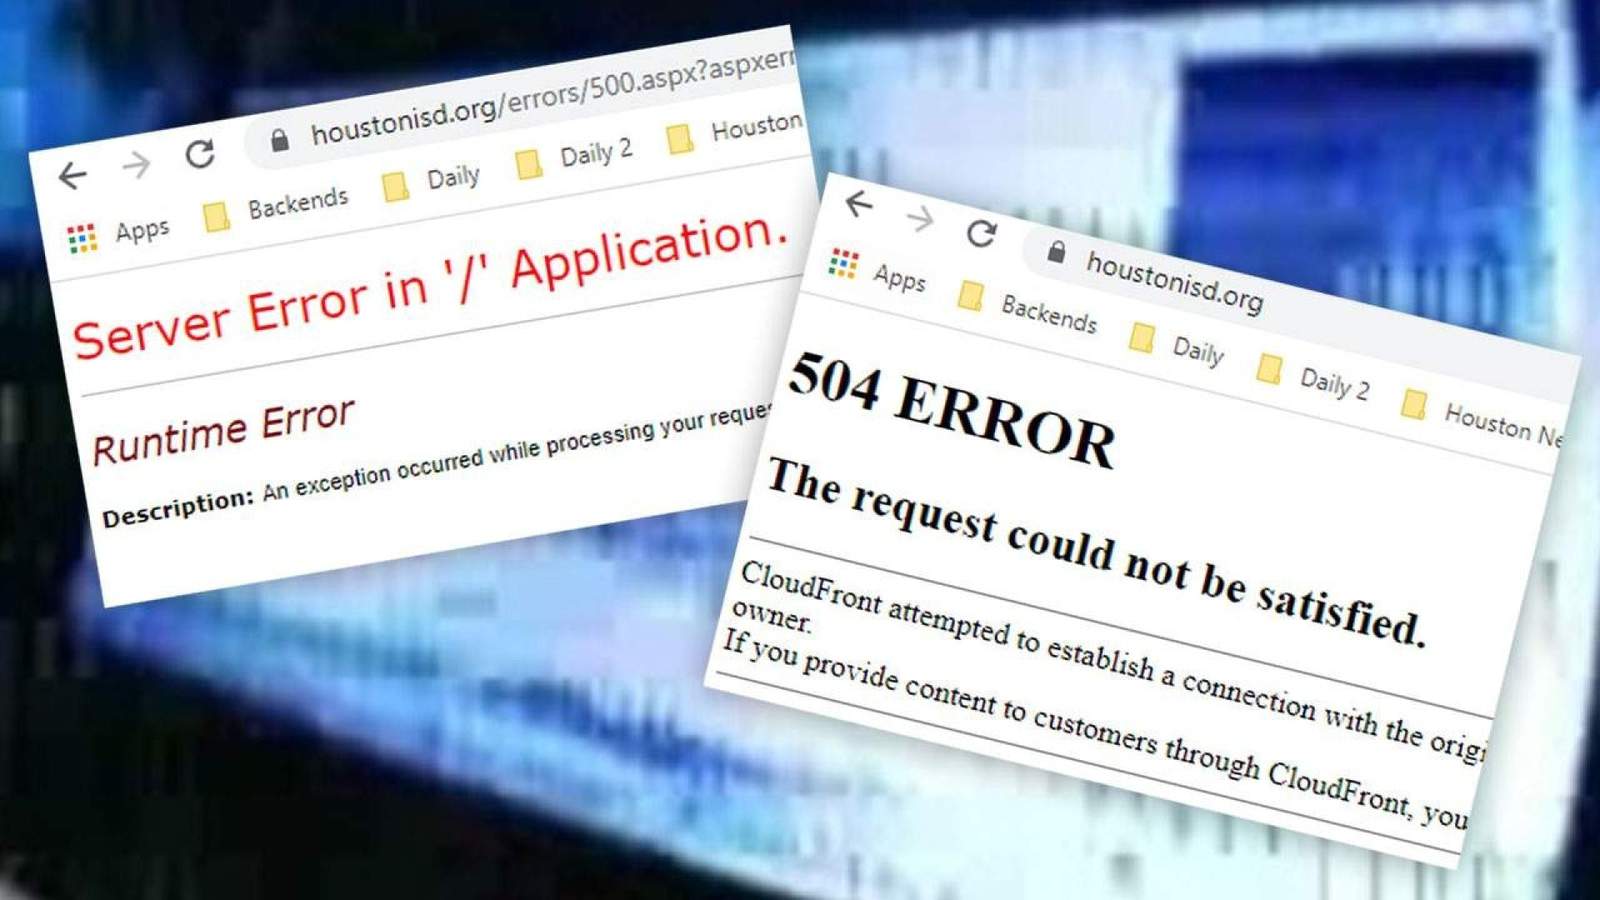 HISD website appears to crash on first day of virtual classes